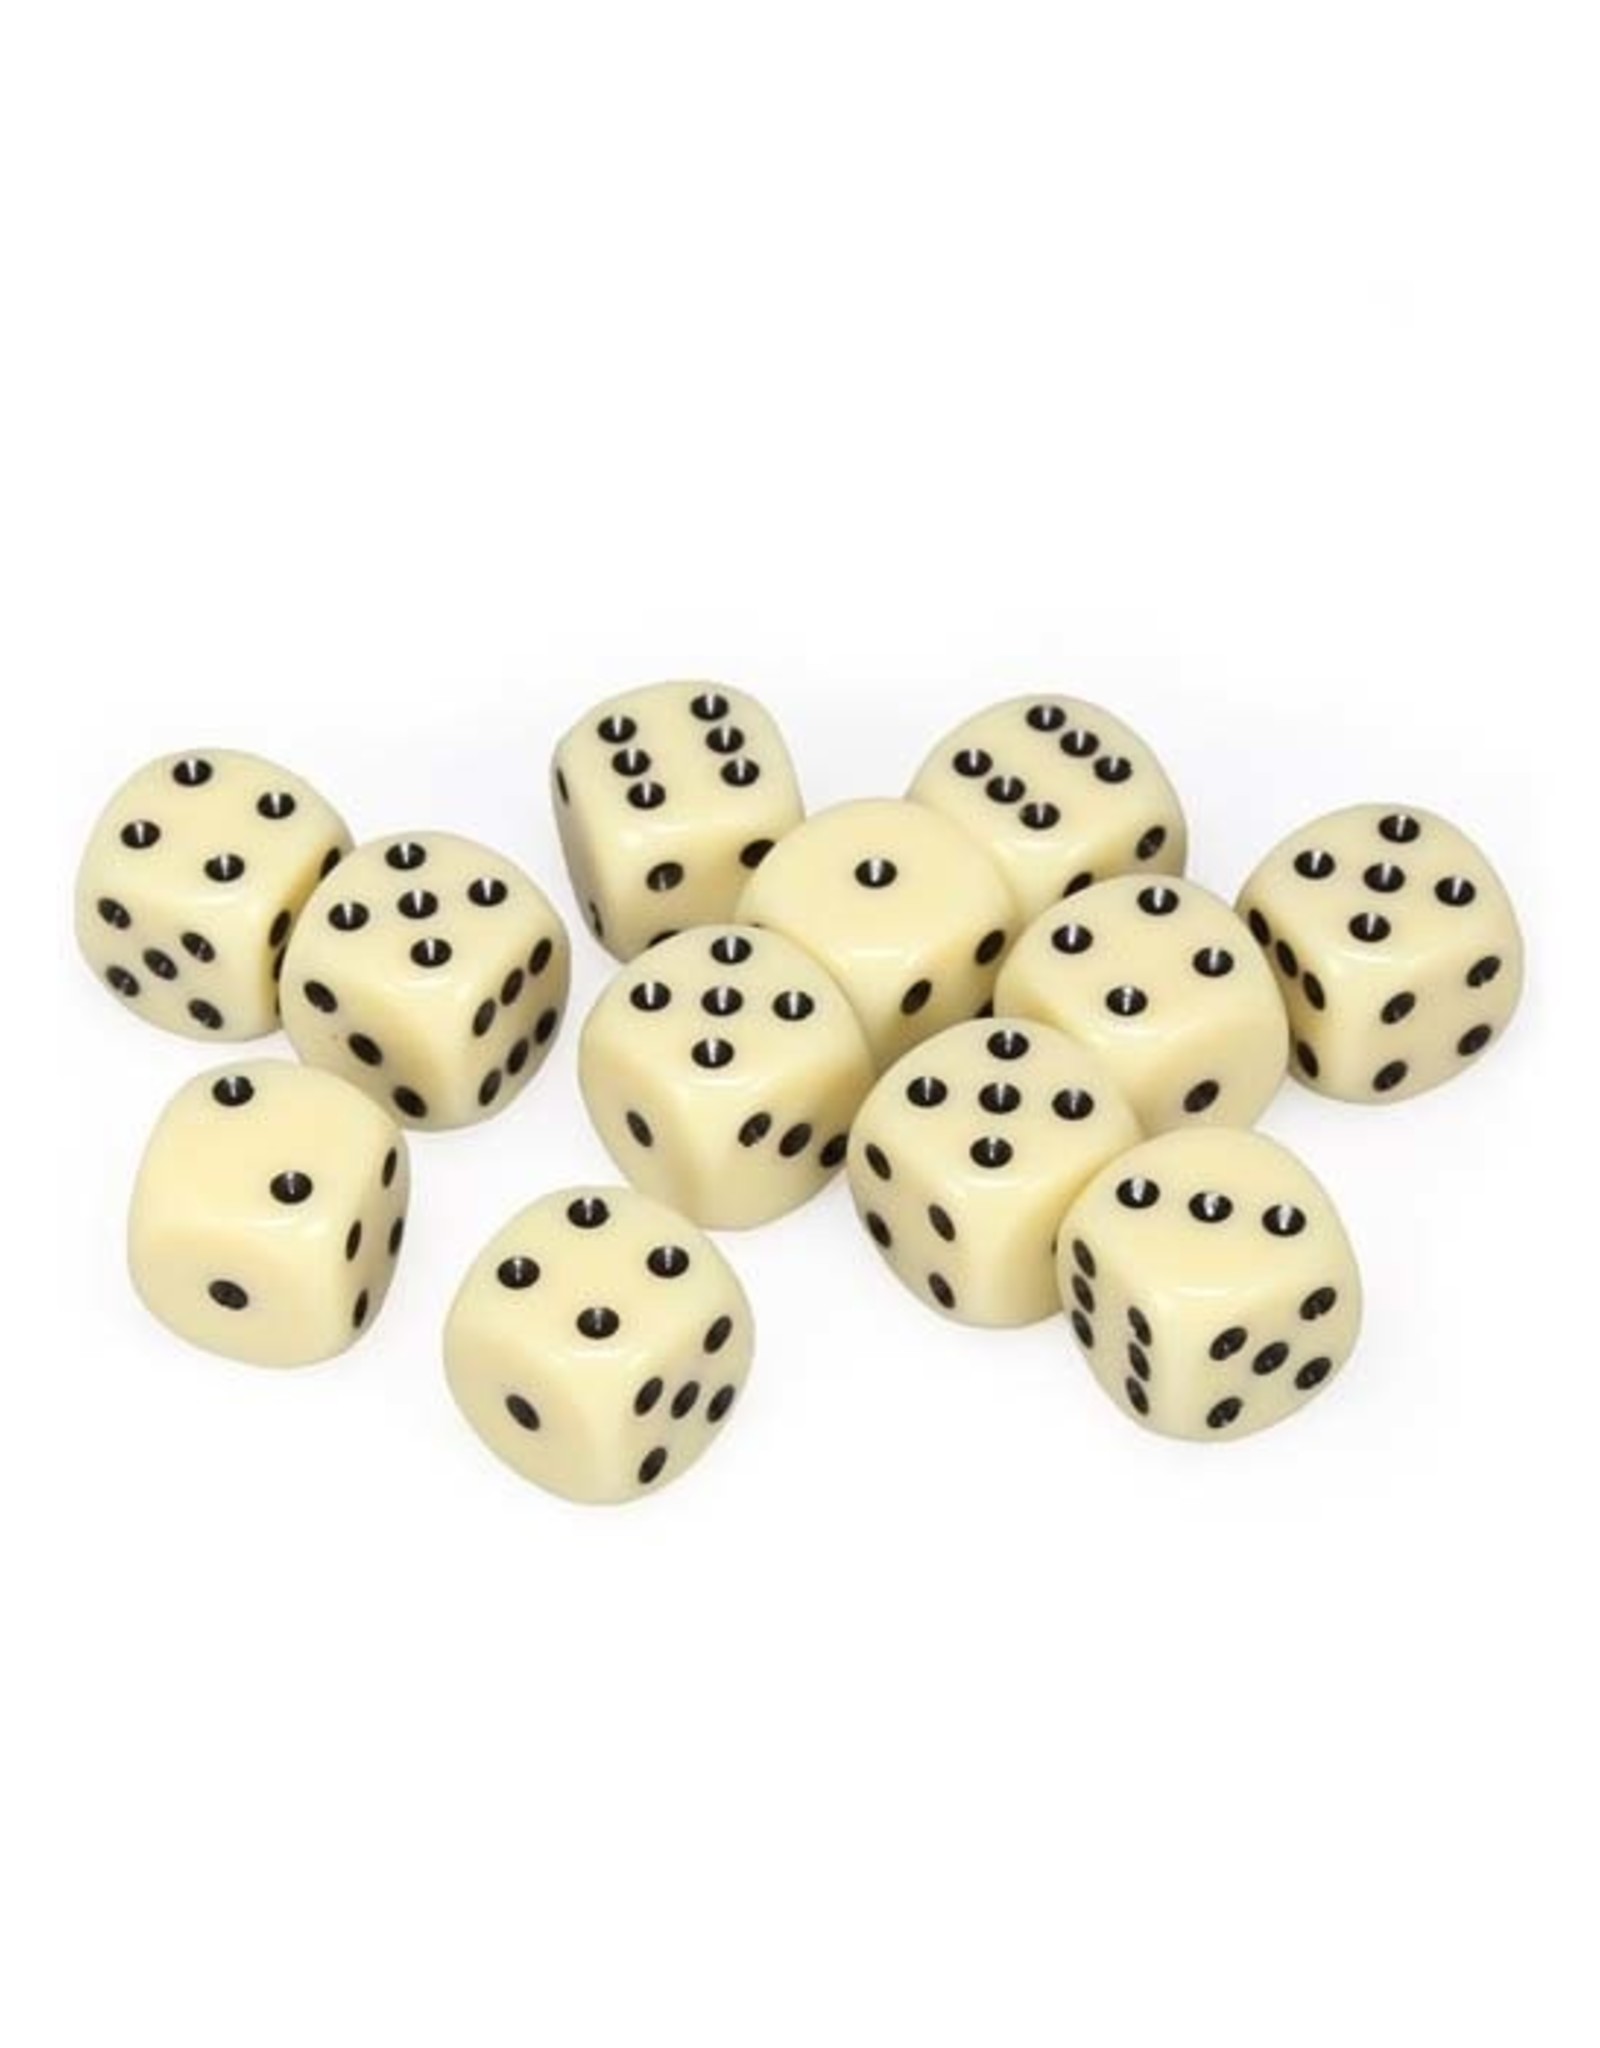 Chessex Chessex: 16mm D6 - Opaque - Ivory w/ Black